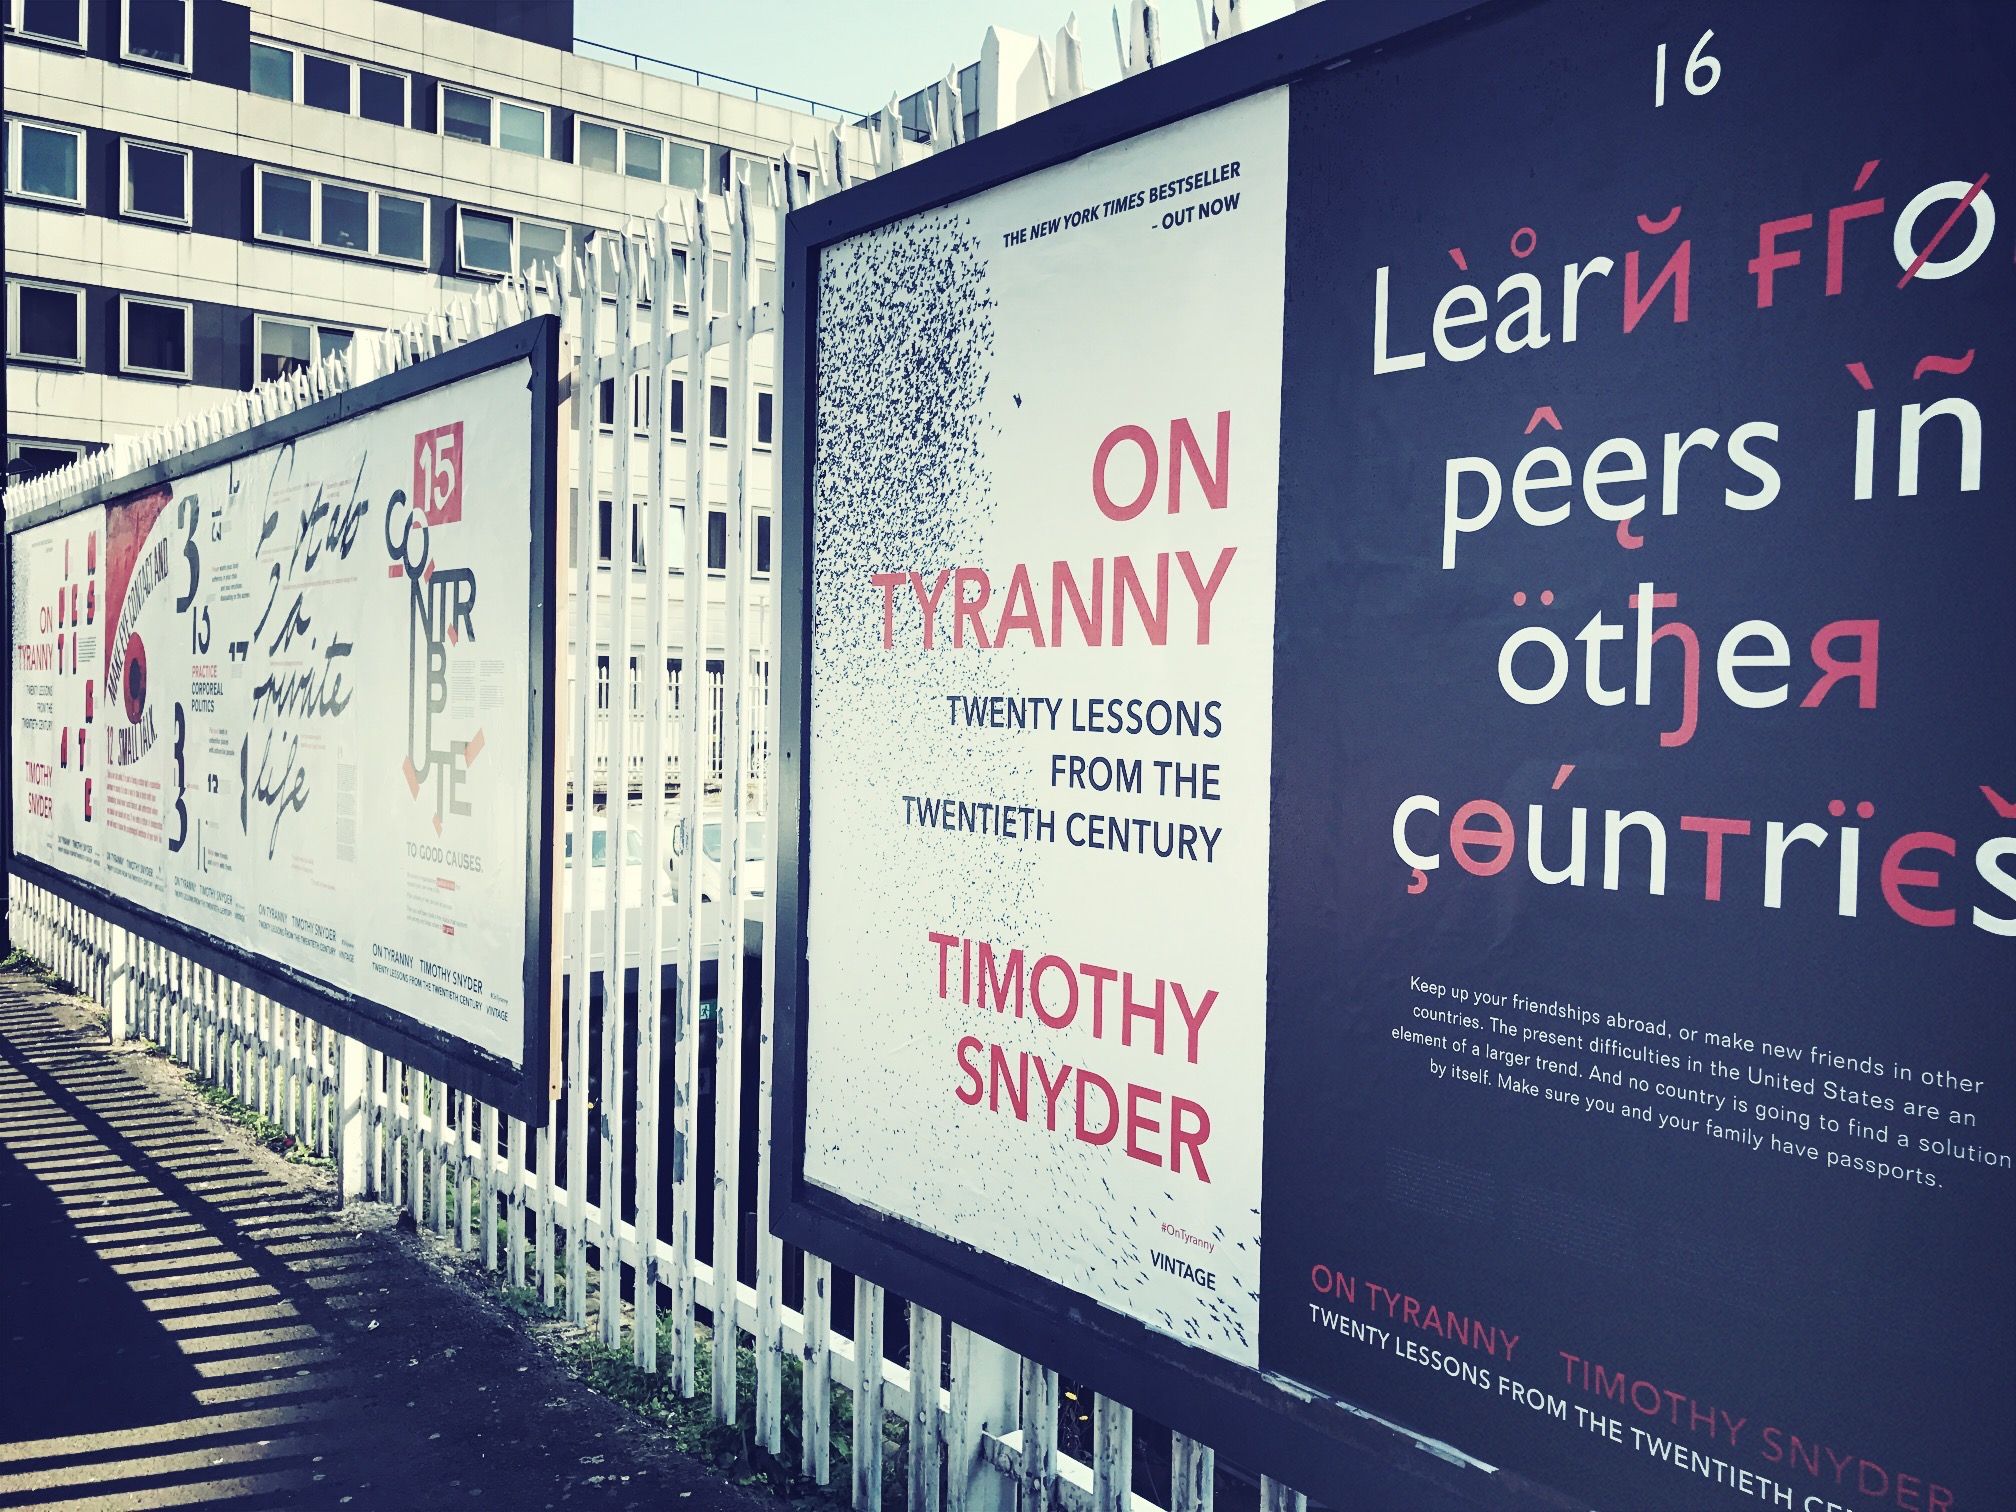 4-19-17 On Tyranny Posters in London